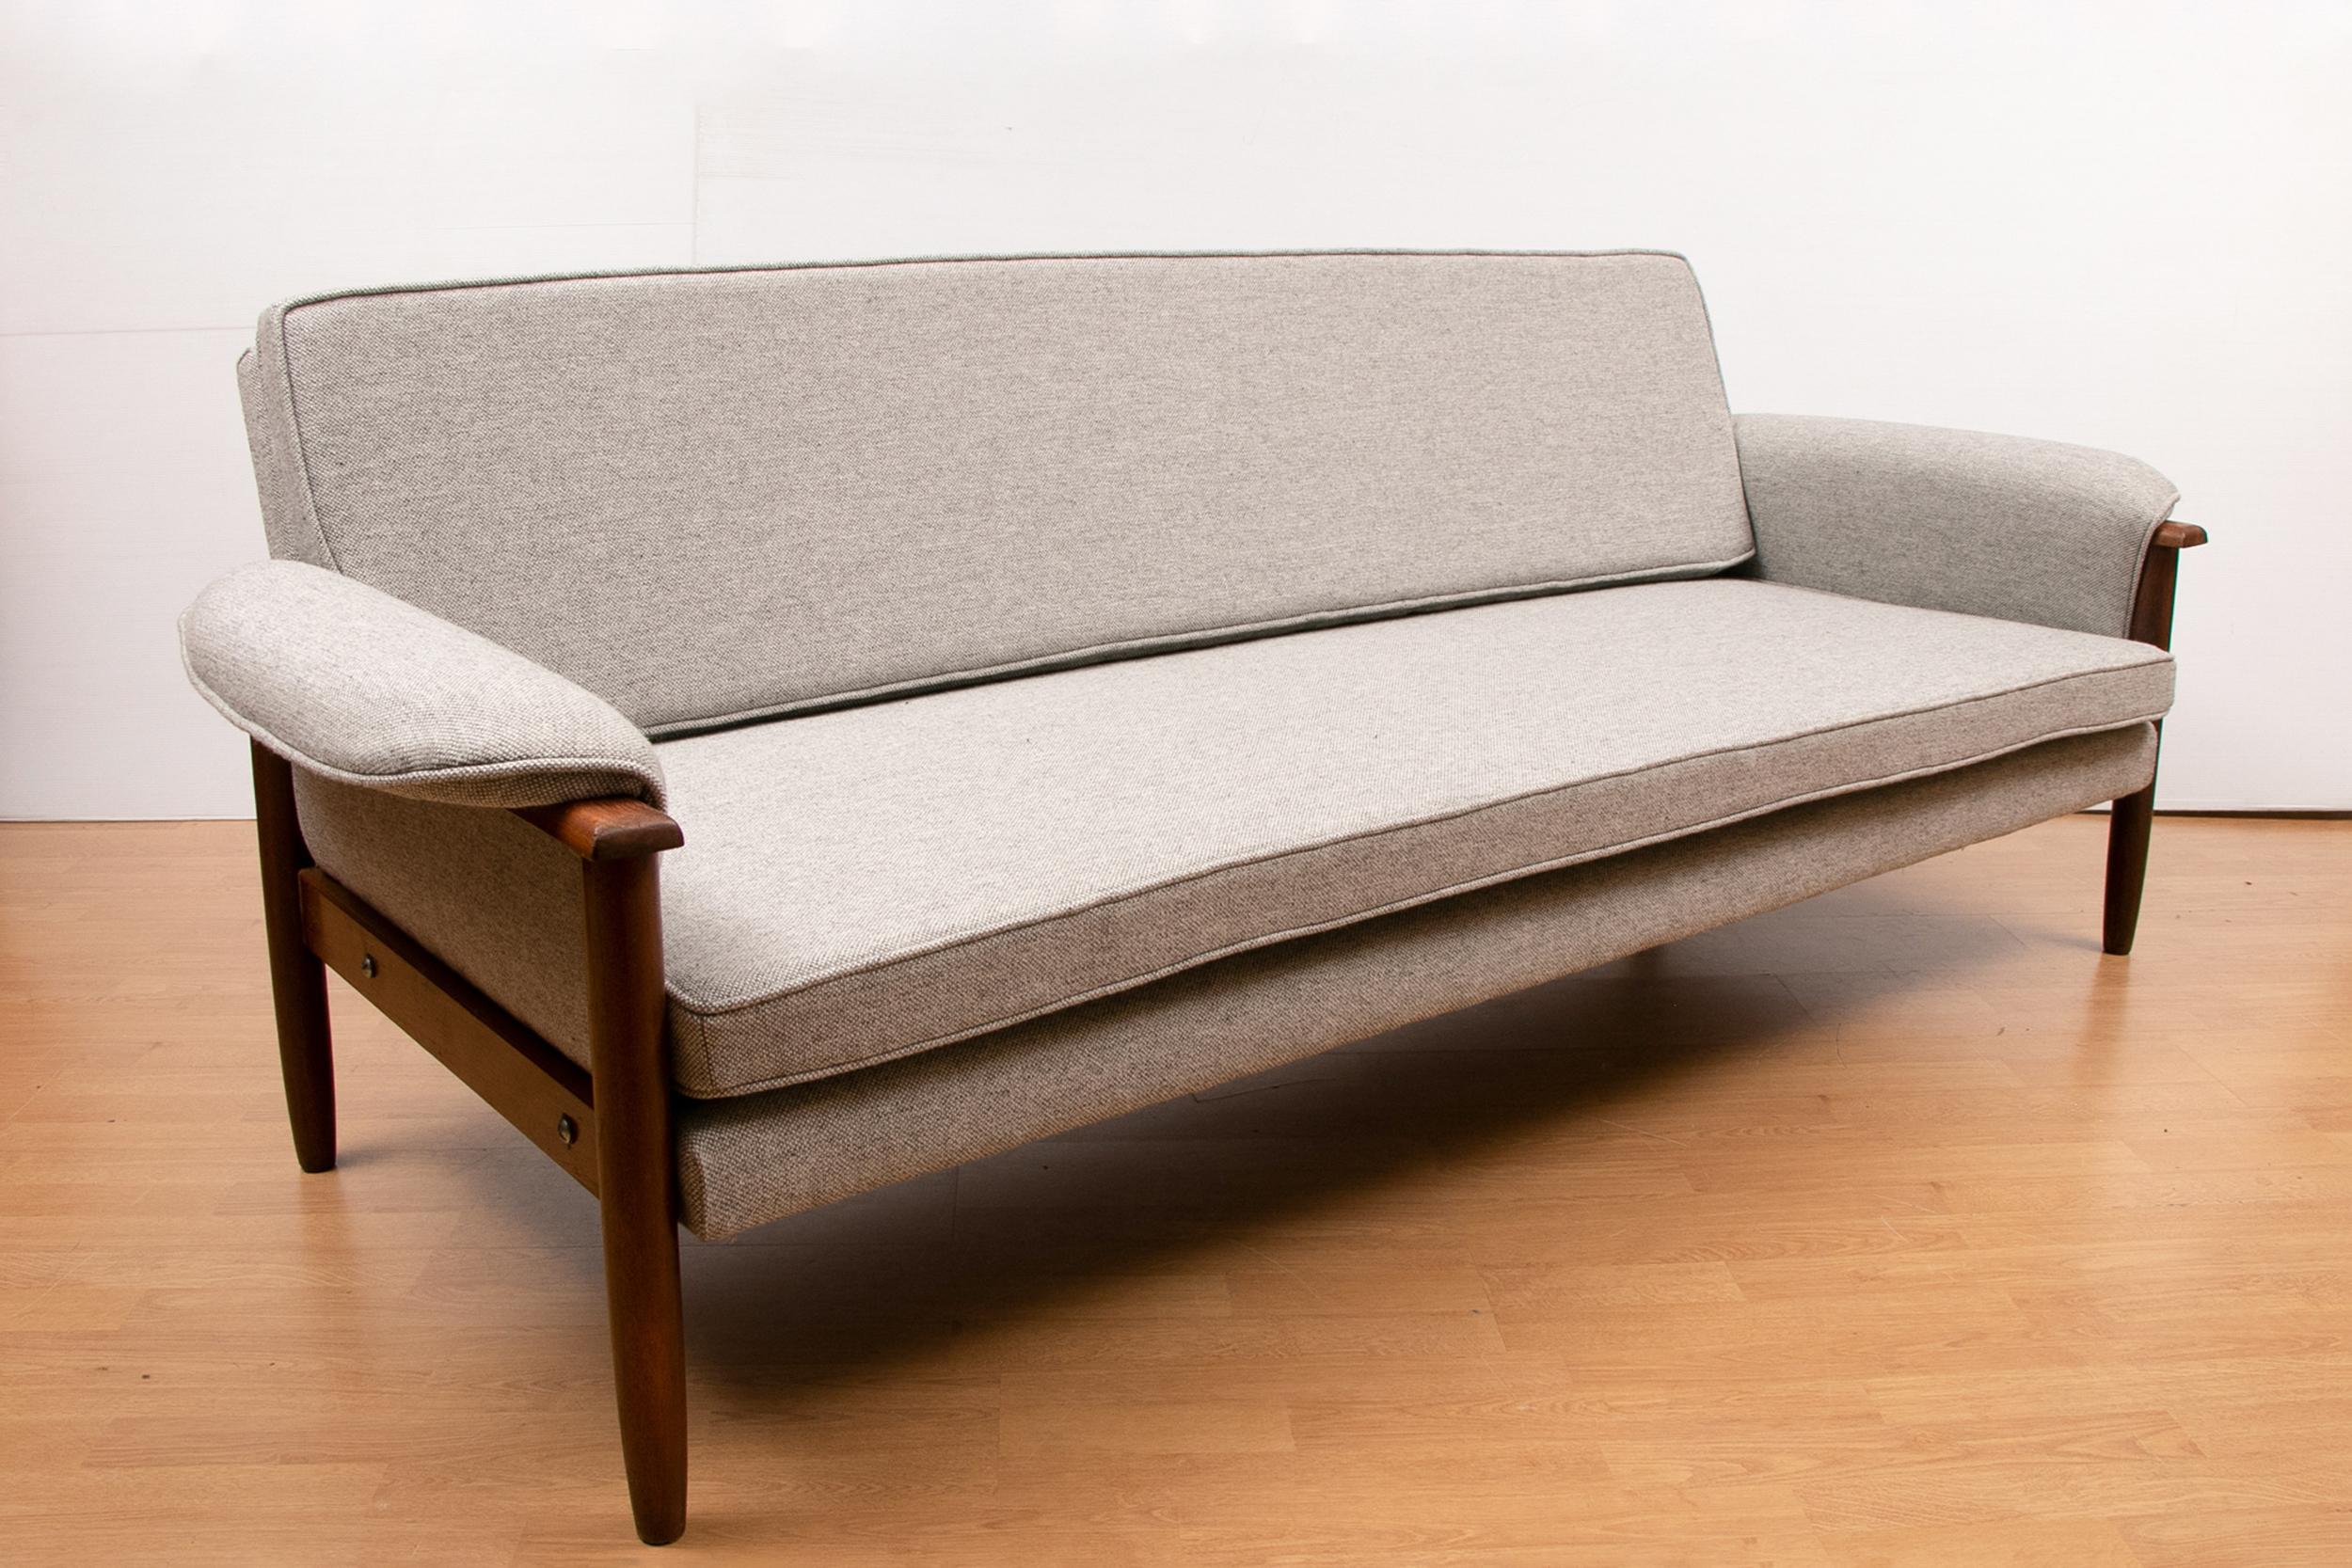 Stunning midcentury teak sofa bed with Kvadrat Hallingdal upholstery, circa 1960s. The sofa bed has been completely refurbished and reupholstered with Kvadrat Hallingdal fabric. 2 legs are screwed to the back of the backrest when used as a bed.